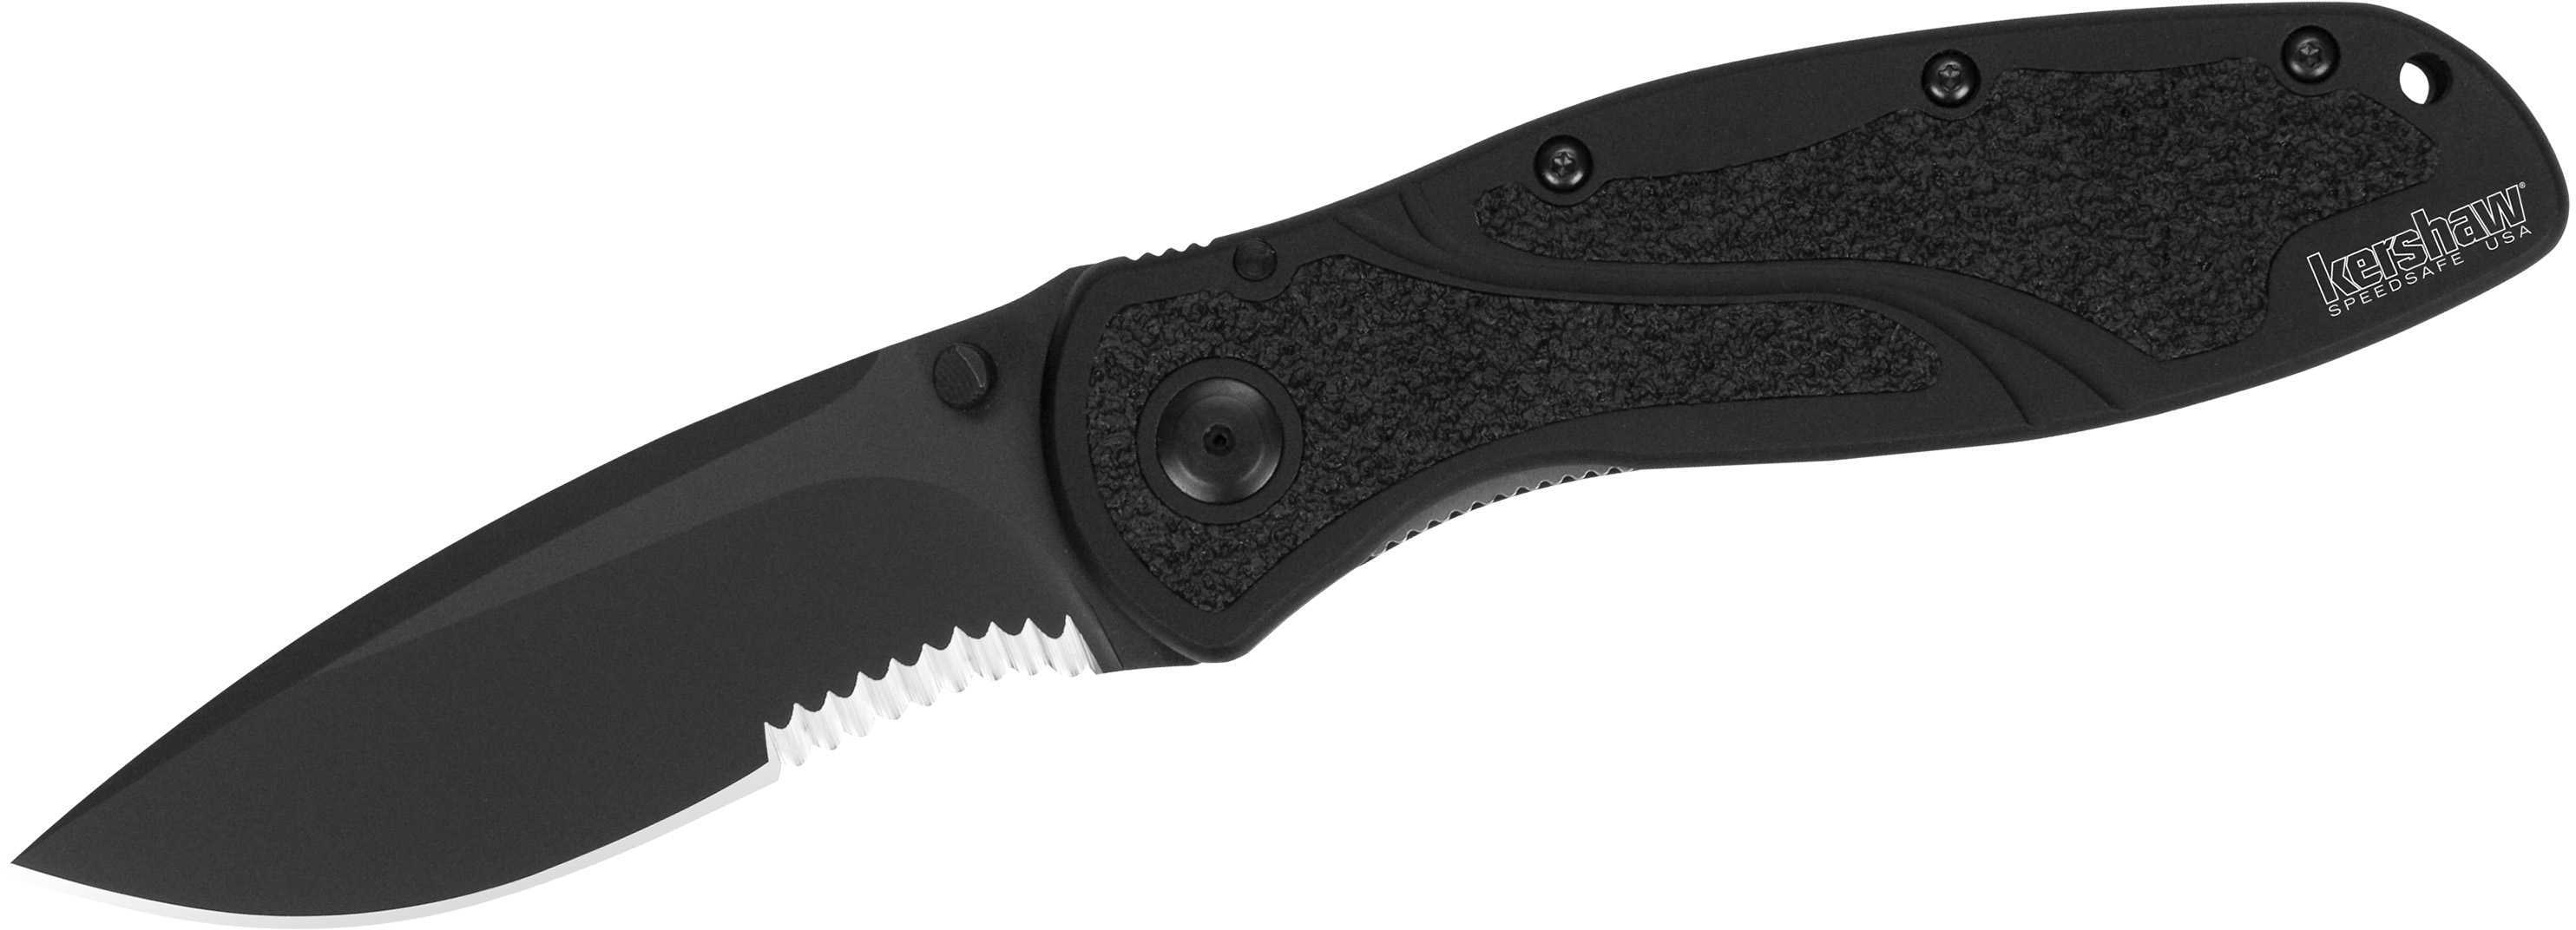 Kershaw Folding Knife W/Partially Serrated Edge Md: 1670BLKST